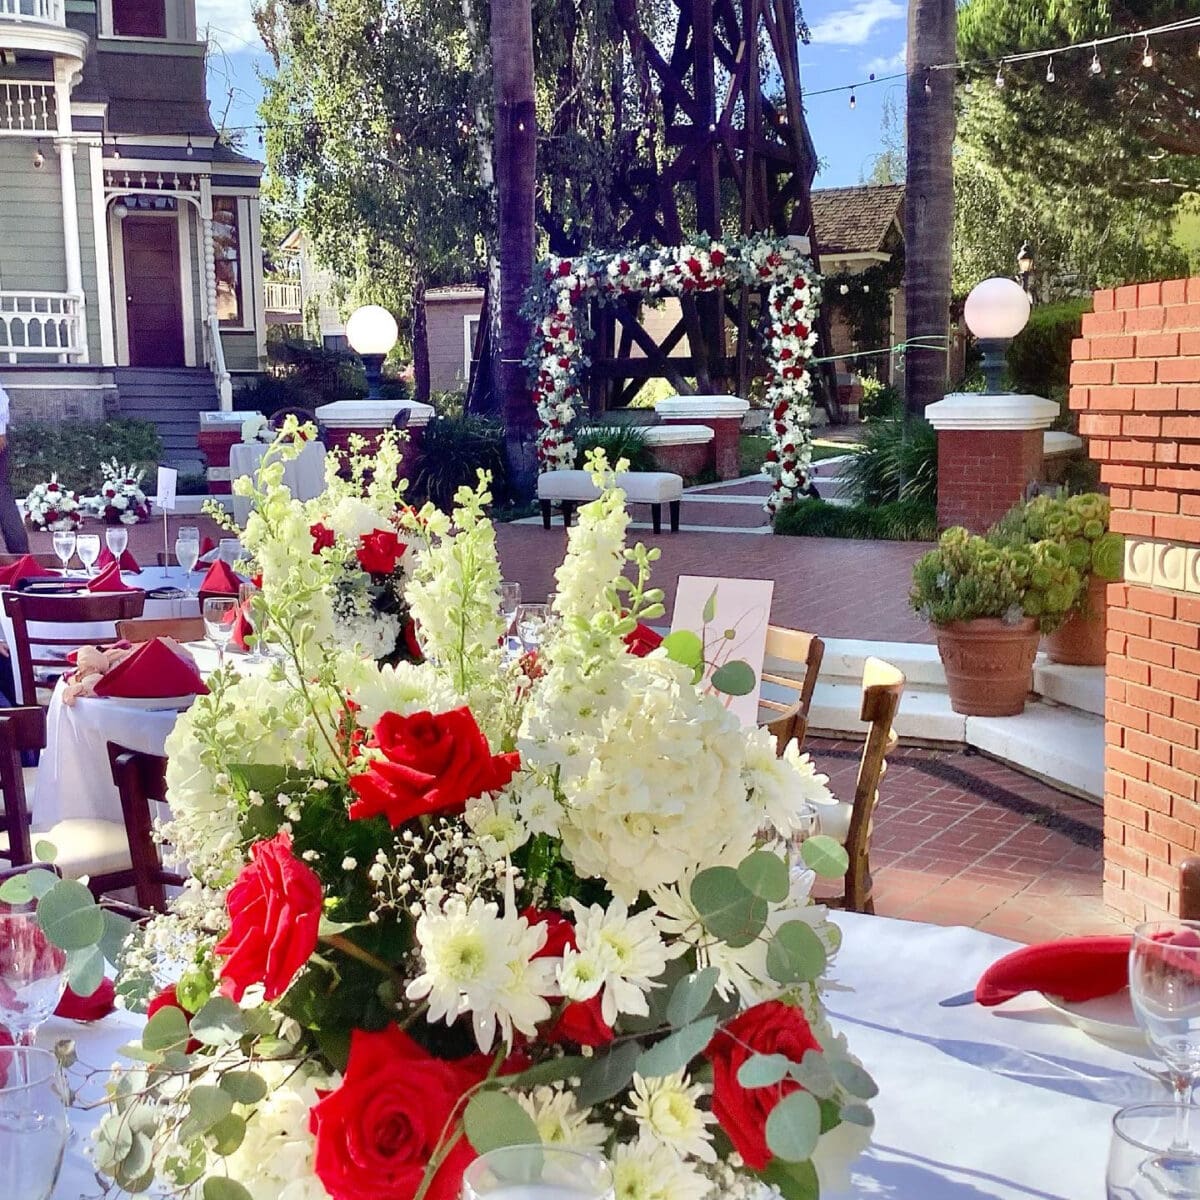 Outdoor wedding reception setup with floral centerpieces, red napkins, and an arch decorated with flowers in a garden courtyard.